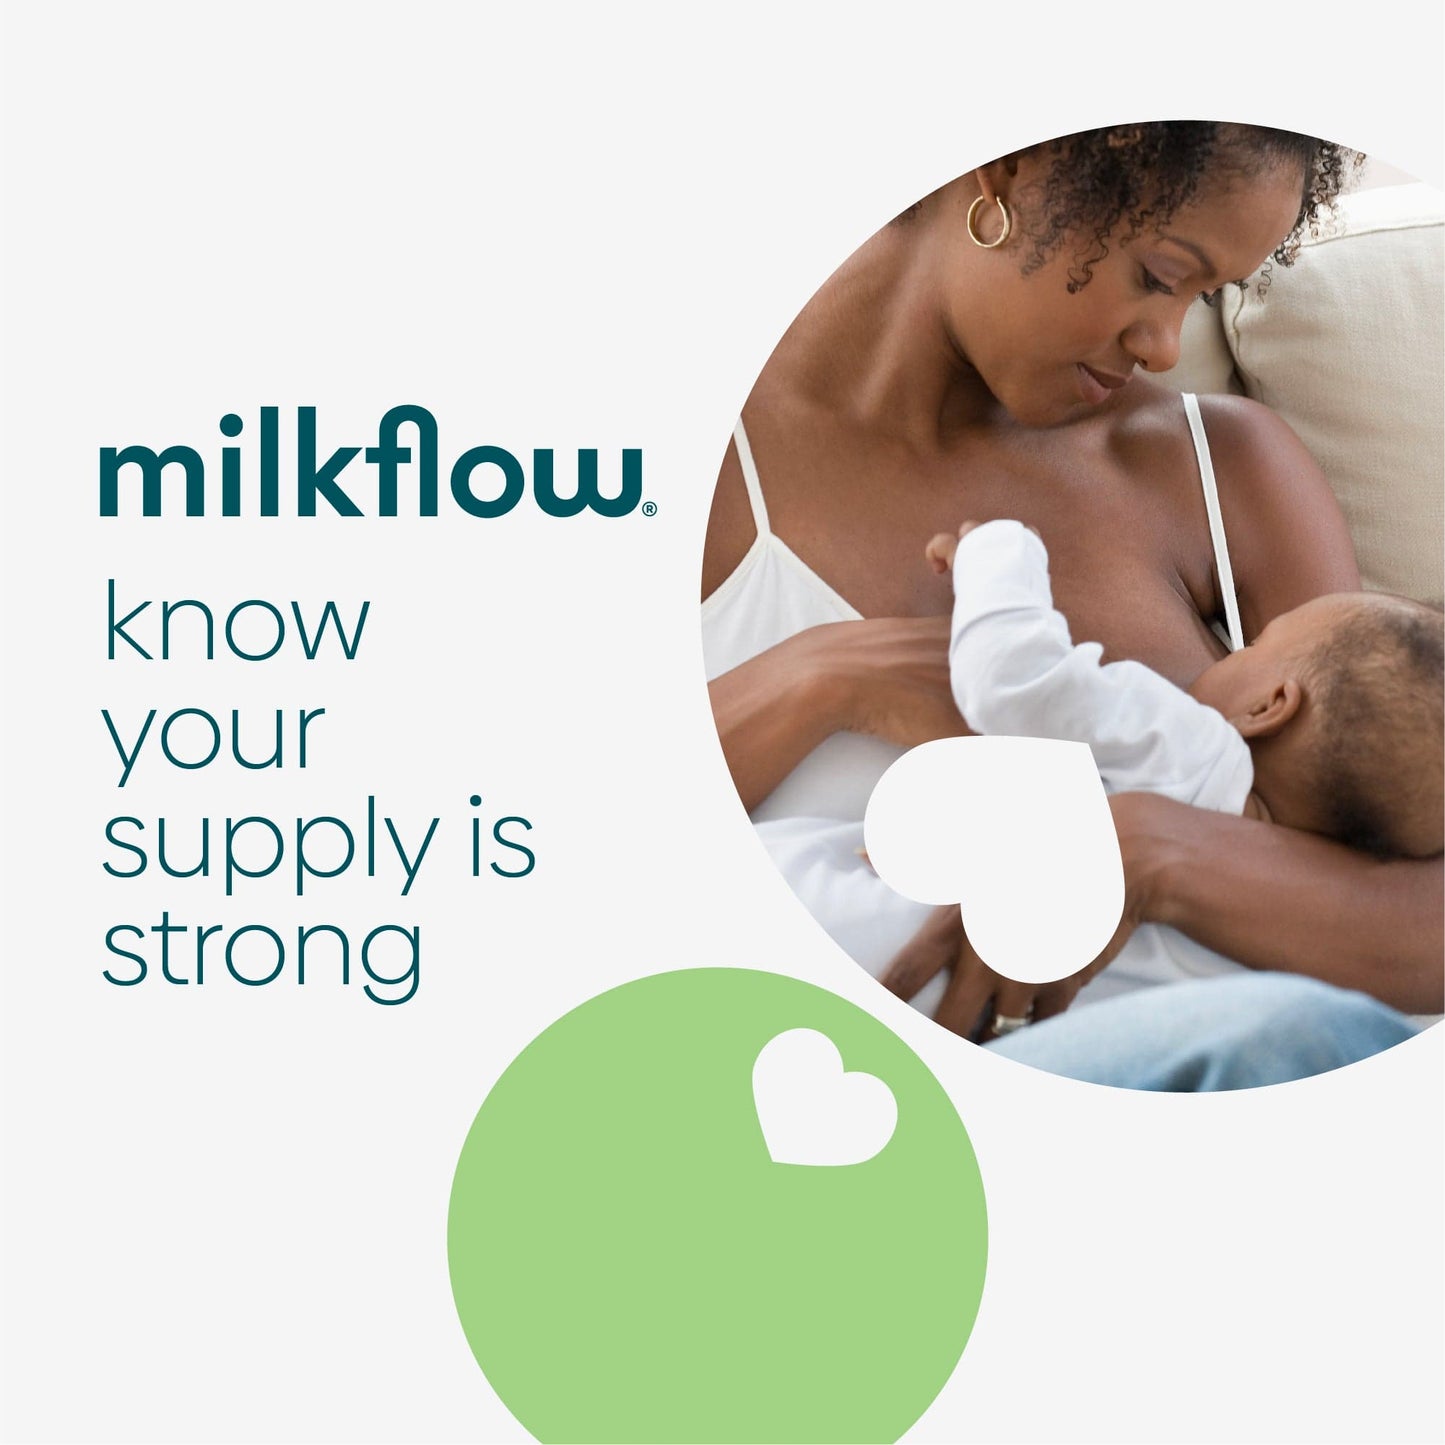 An image of a woman breastfeeding her child thanks to MilkFlow